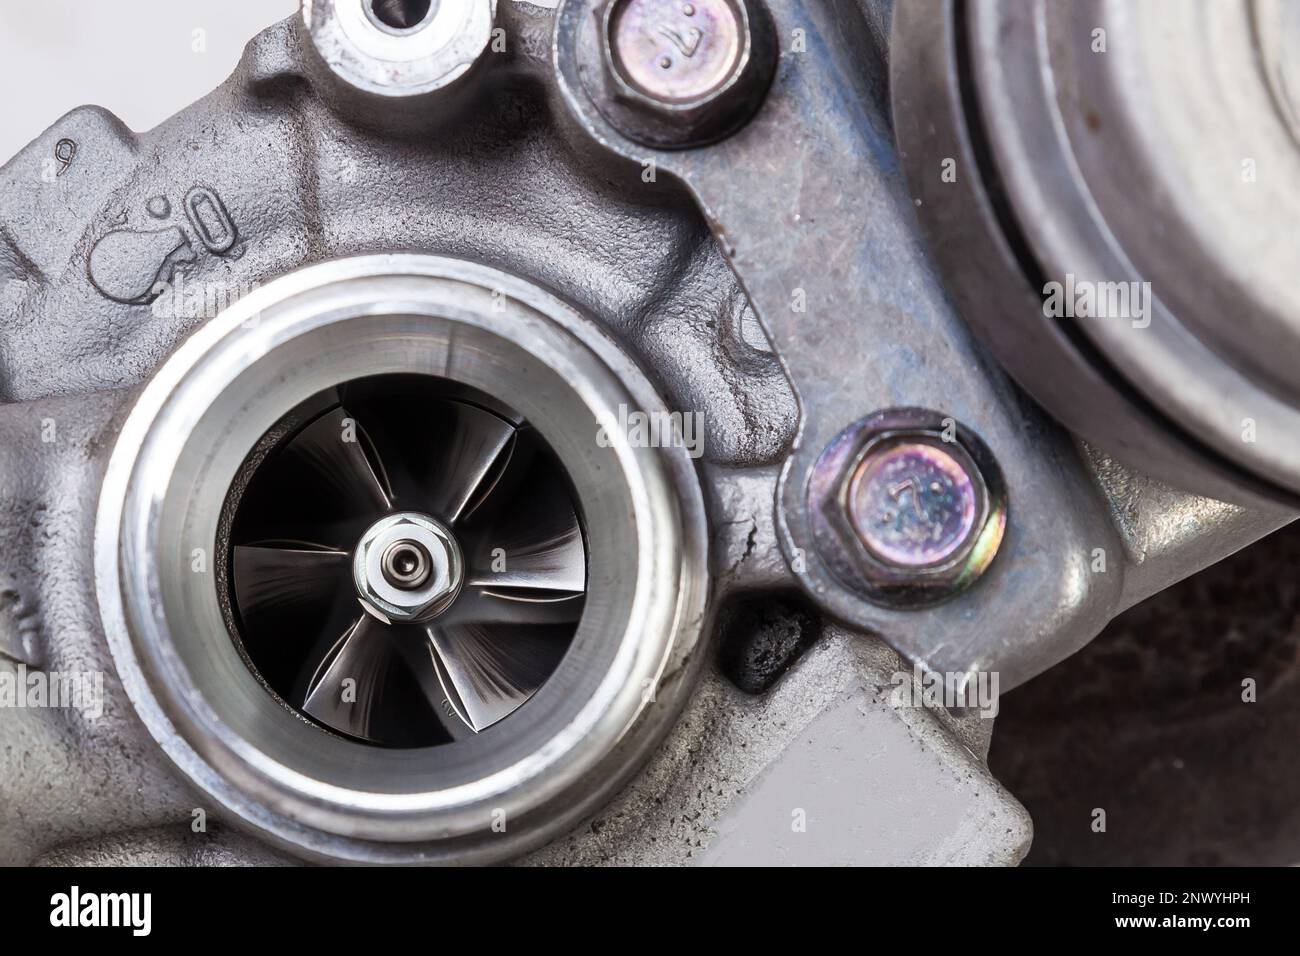 Turbo charger installed for power booster torque drive on white isolated background. Auto service industry for racing. Stock Photo